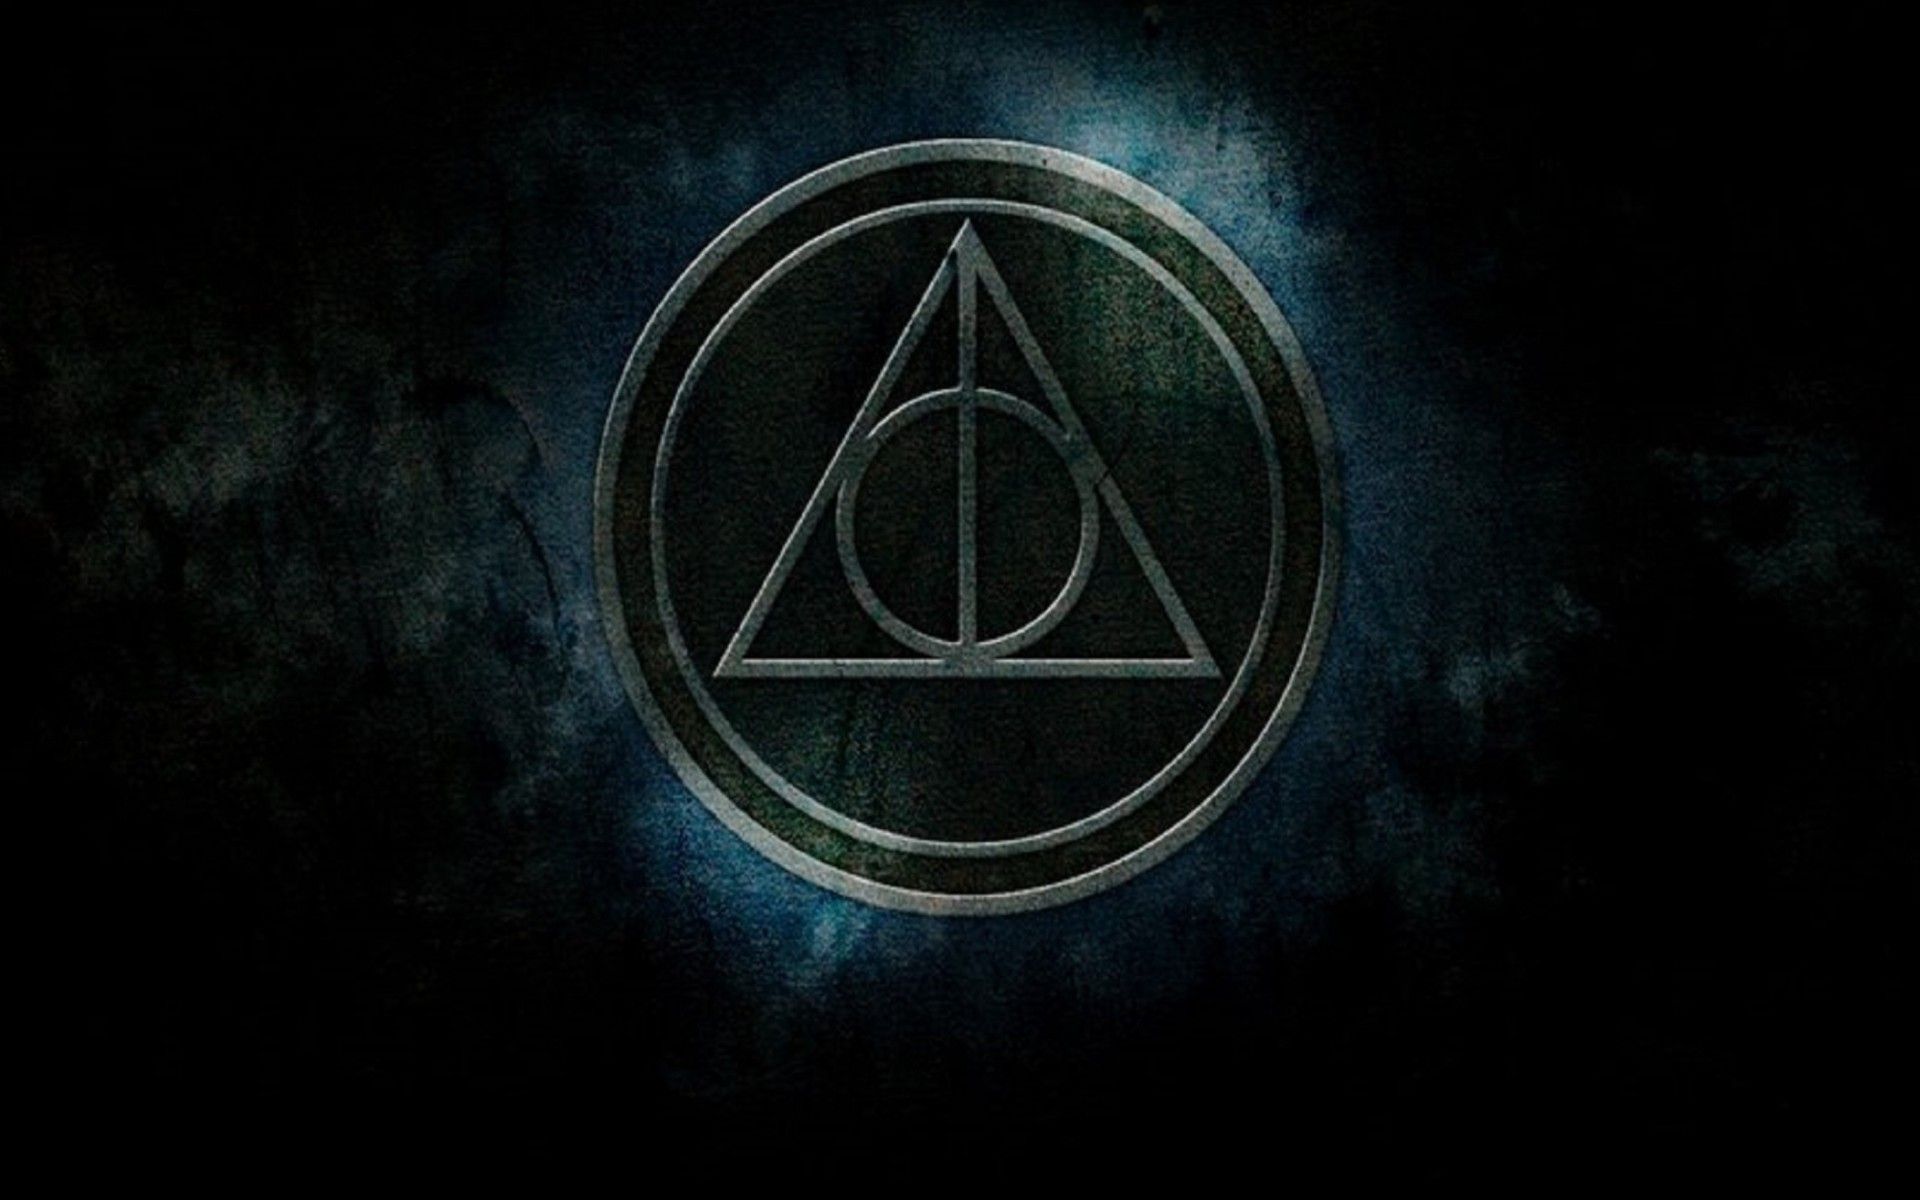 576308 1920x1080 harry potter high resolution desktop backgrounds PNG 447  kB  Rare Gallery HD Wallpapers